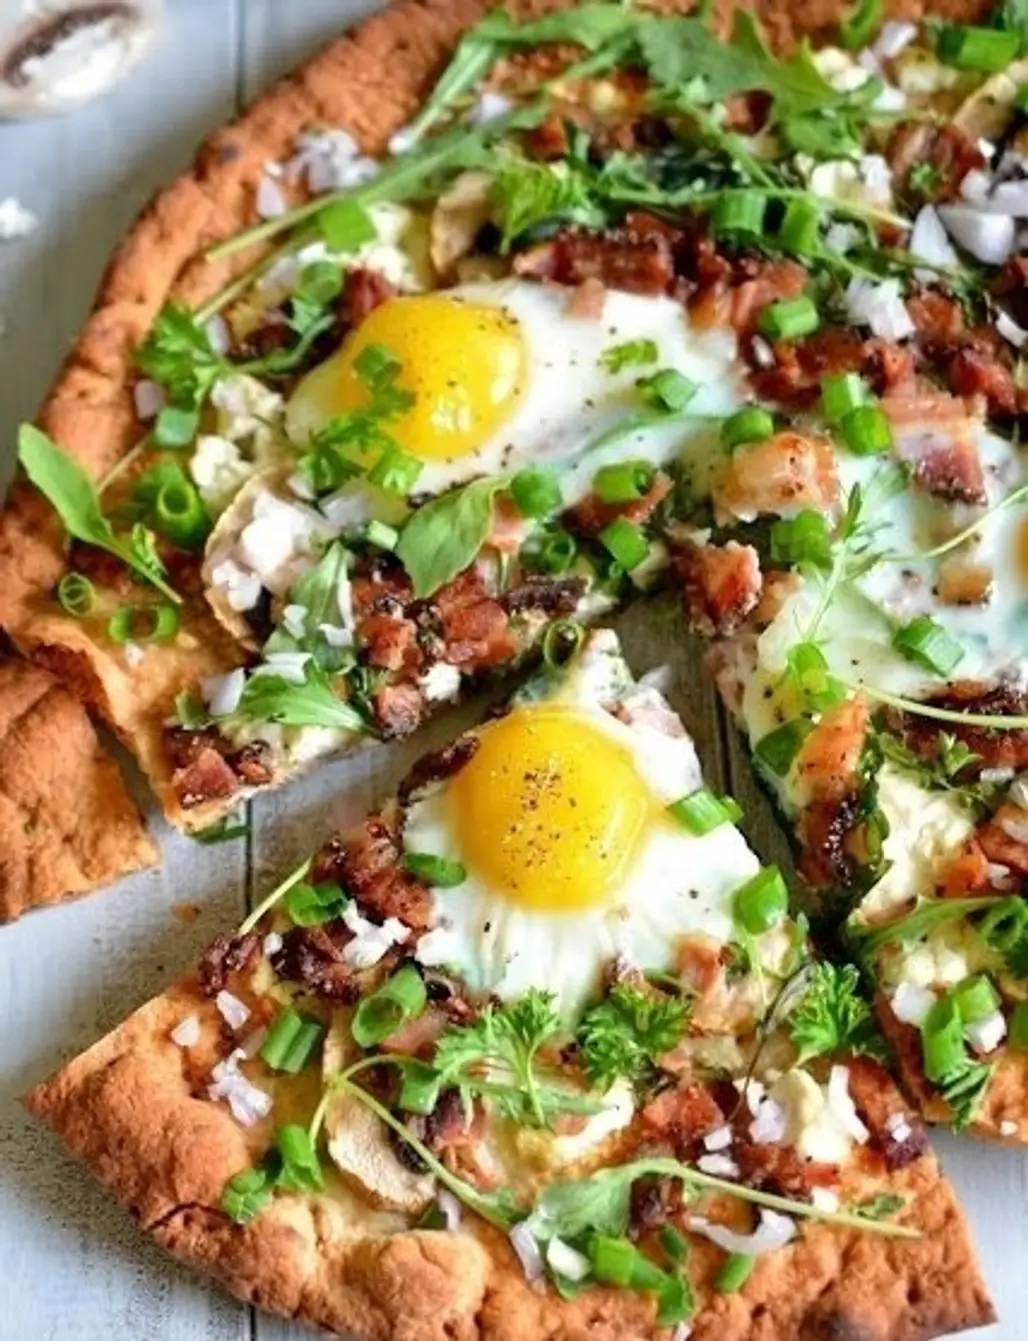 An Egg-cellent Topping Choice